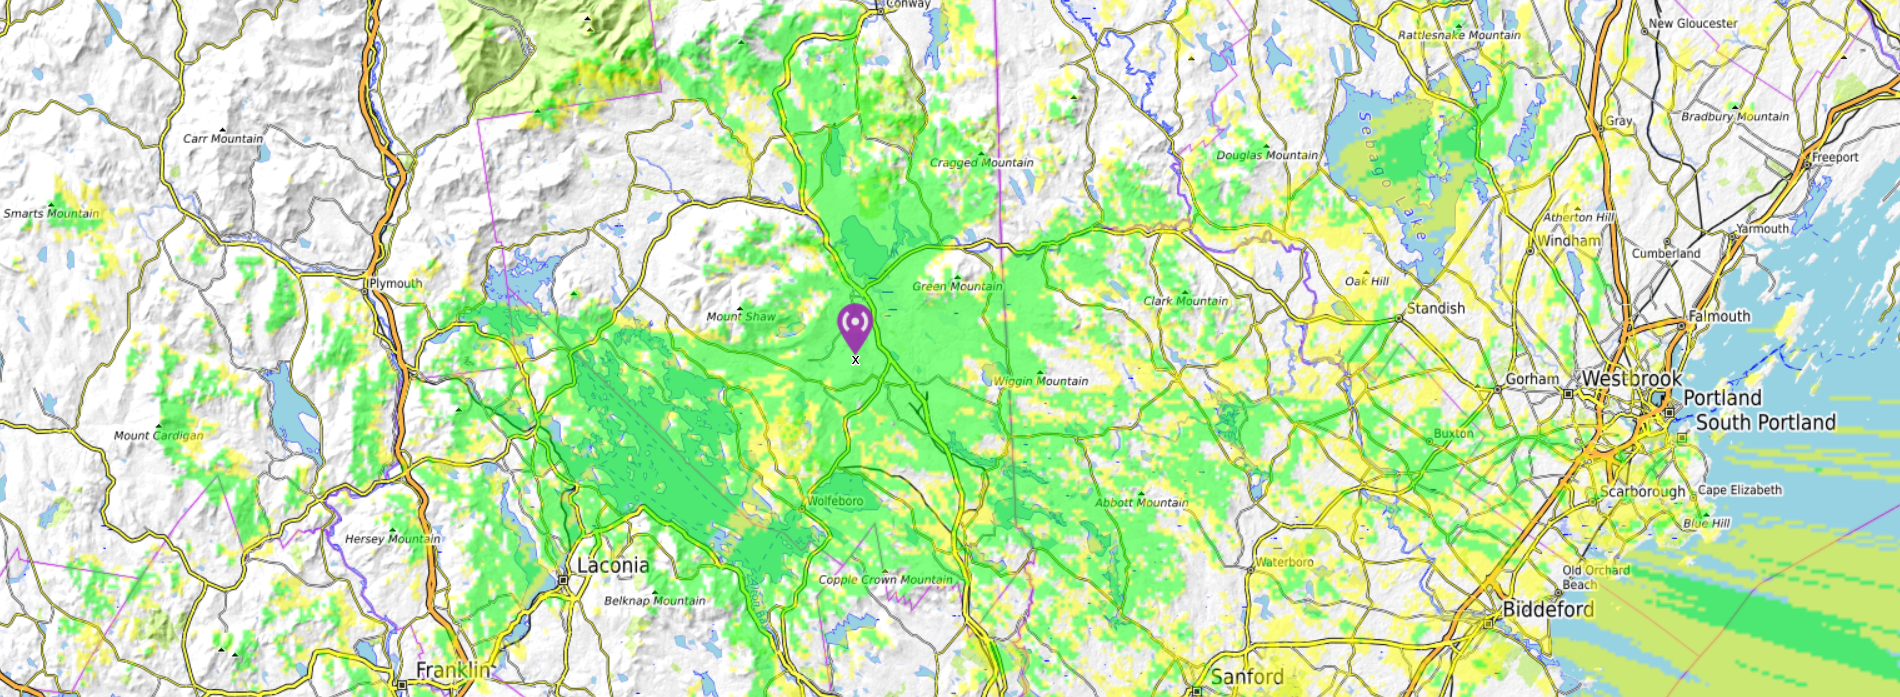 927.900 mhz rf coverage map